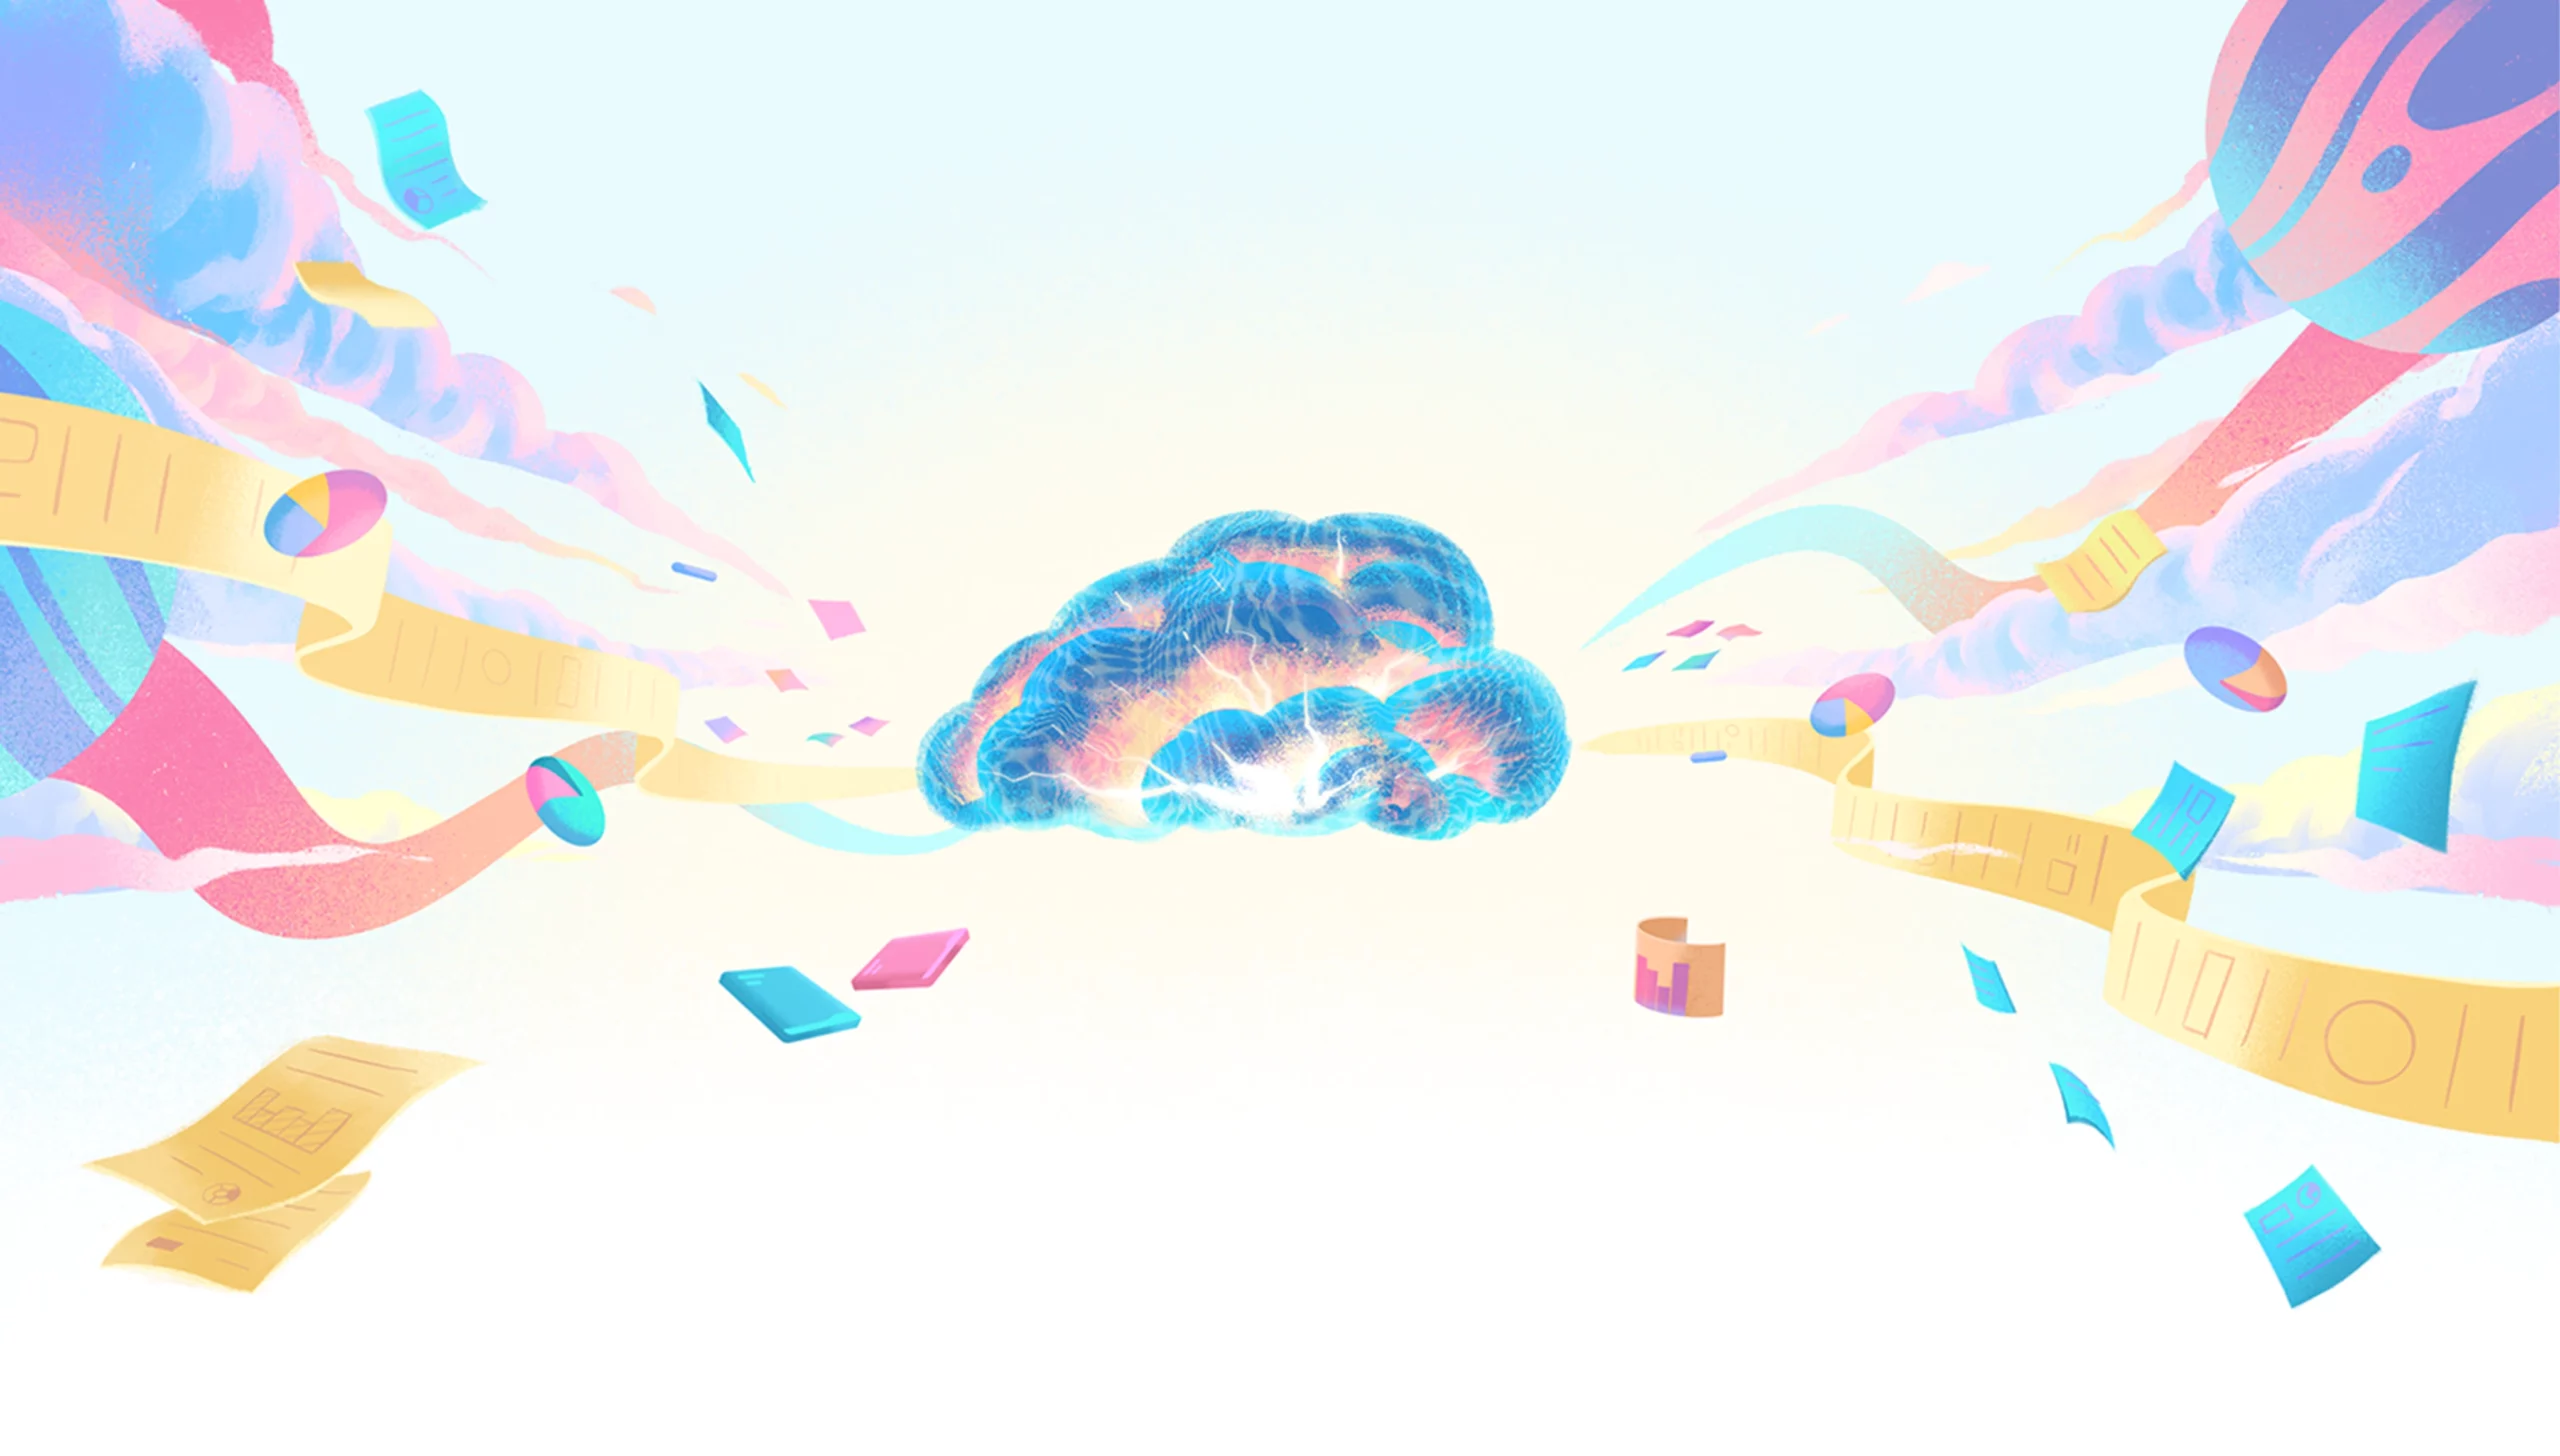 AI in UX Research - illustration of a brain cloud extracting information from everywhere